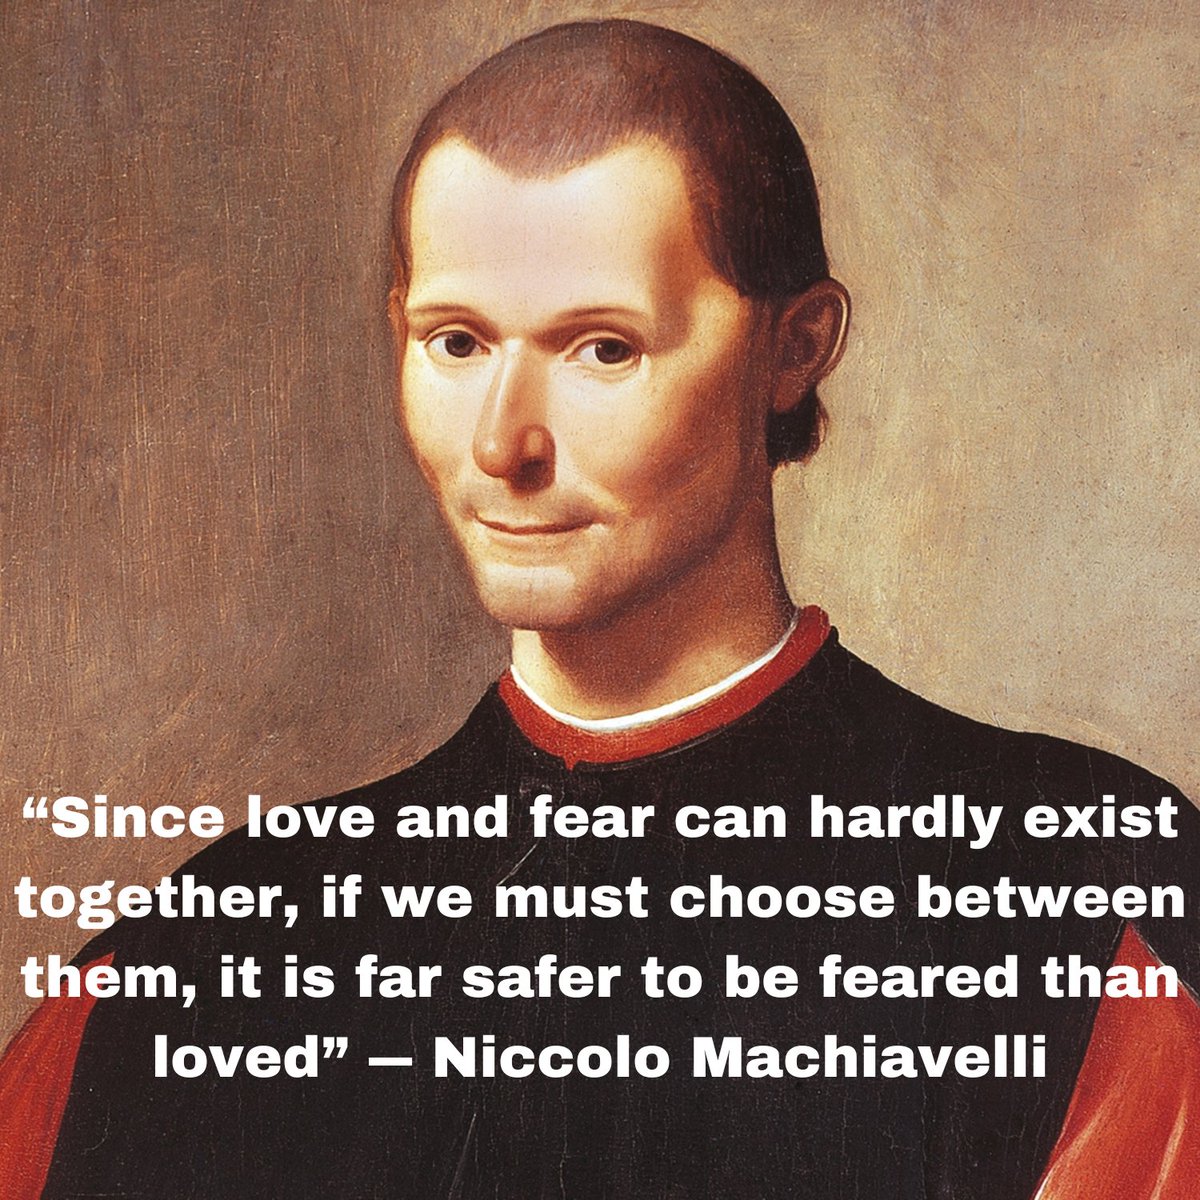 15 Deep Philosophy Quotes From ' Niccolo Machiavelli '

| Thread